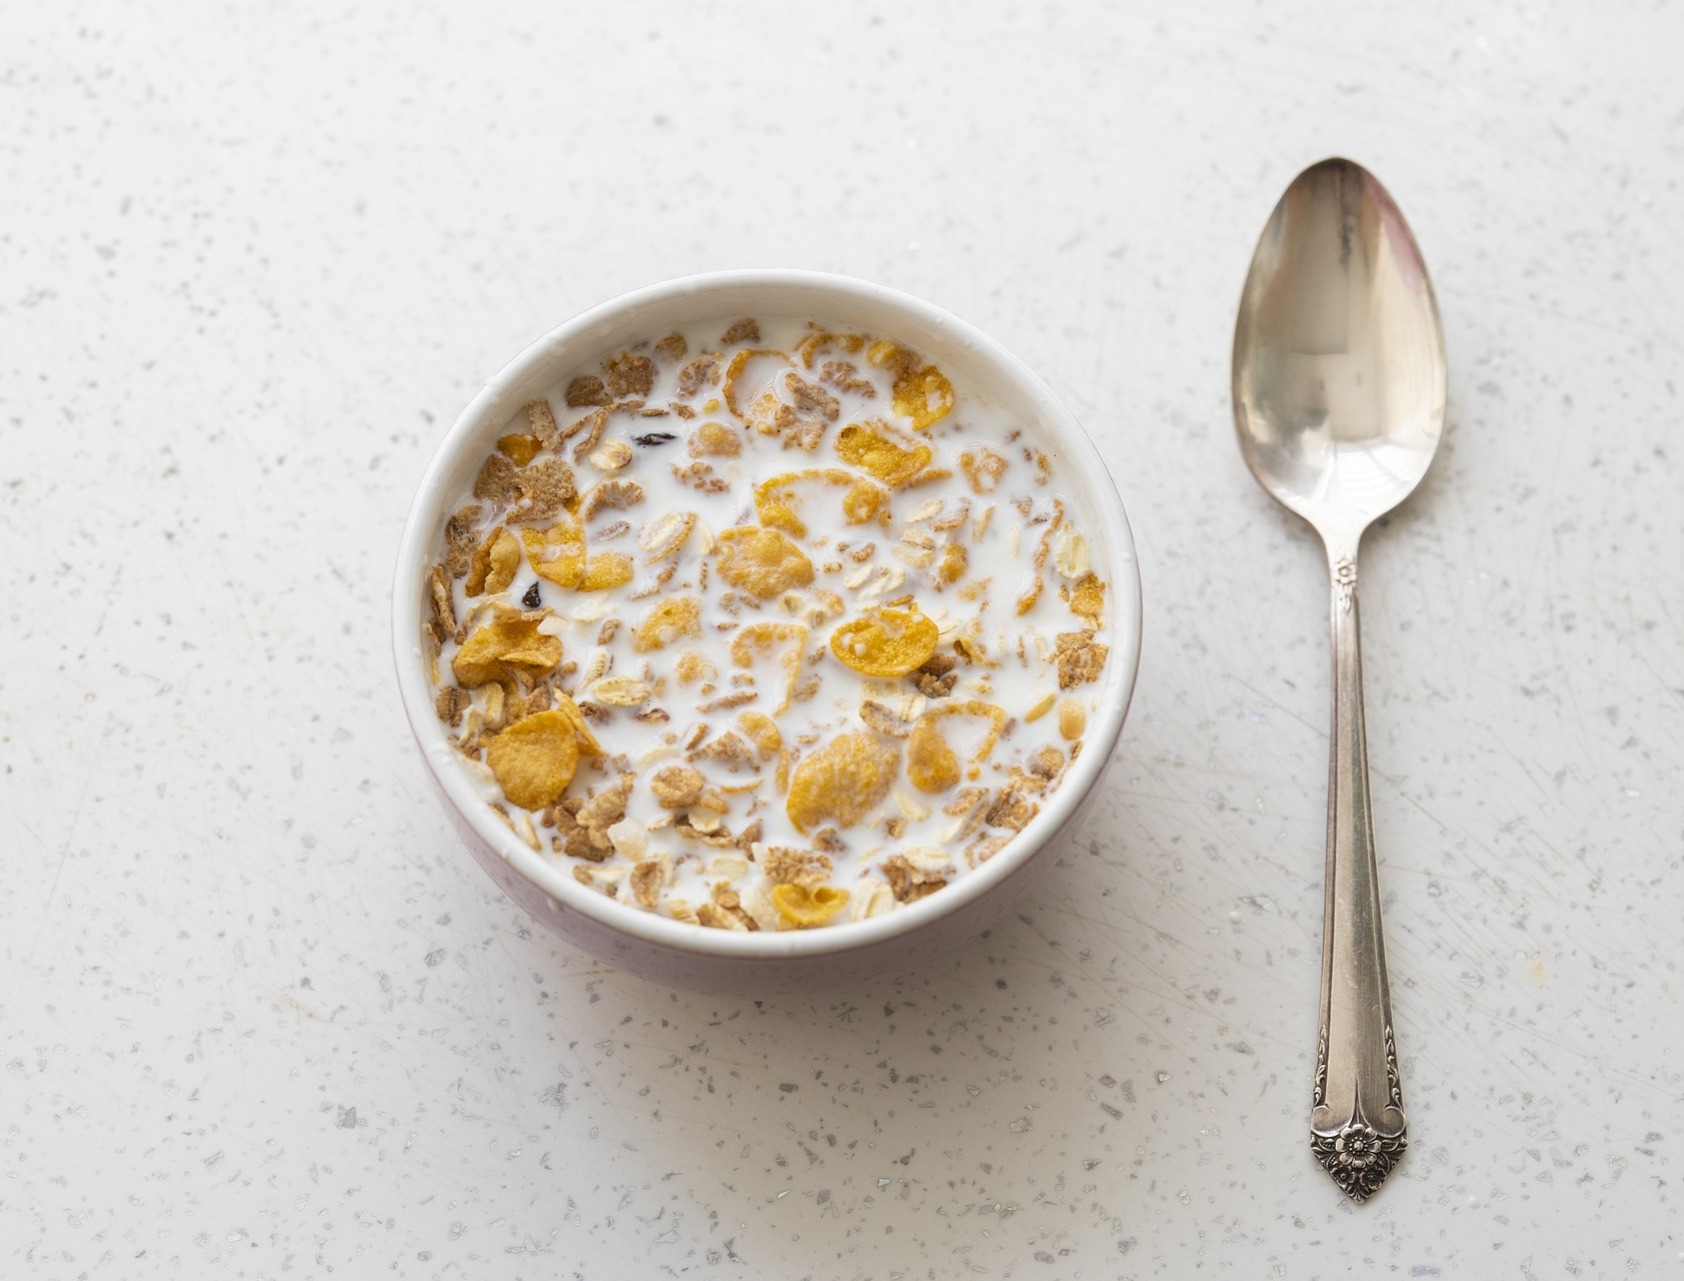 A bowl of cereal with a spoon.  Our no win no fee solicitors can assist with a gluten allergy compensation claim due to undisclosed gluten in cereal.